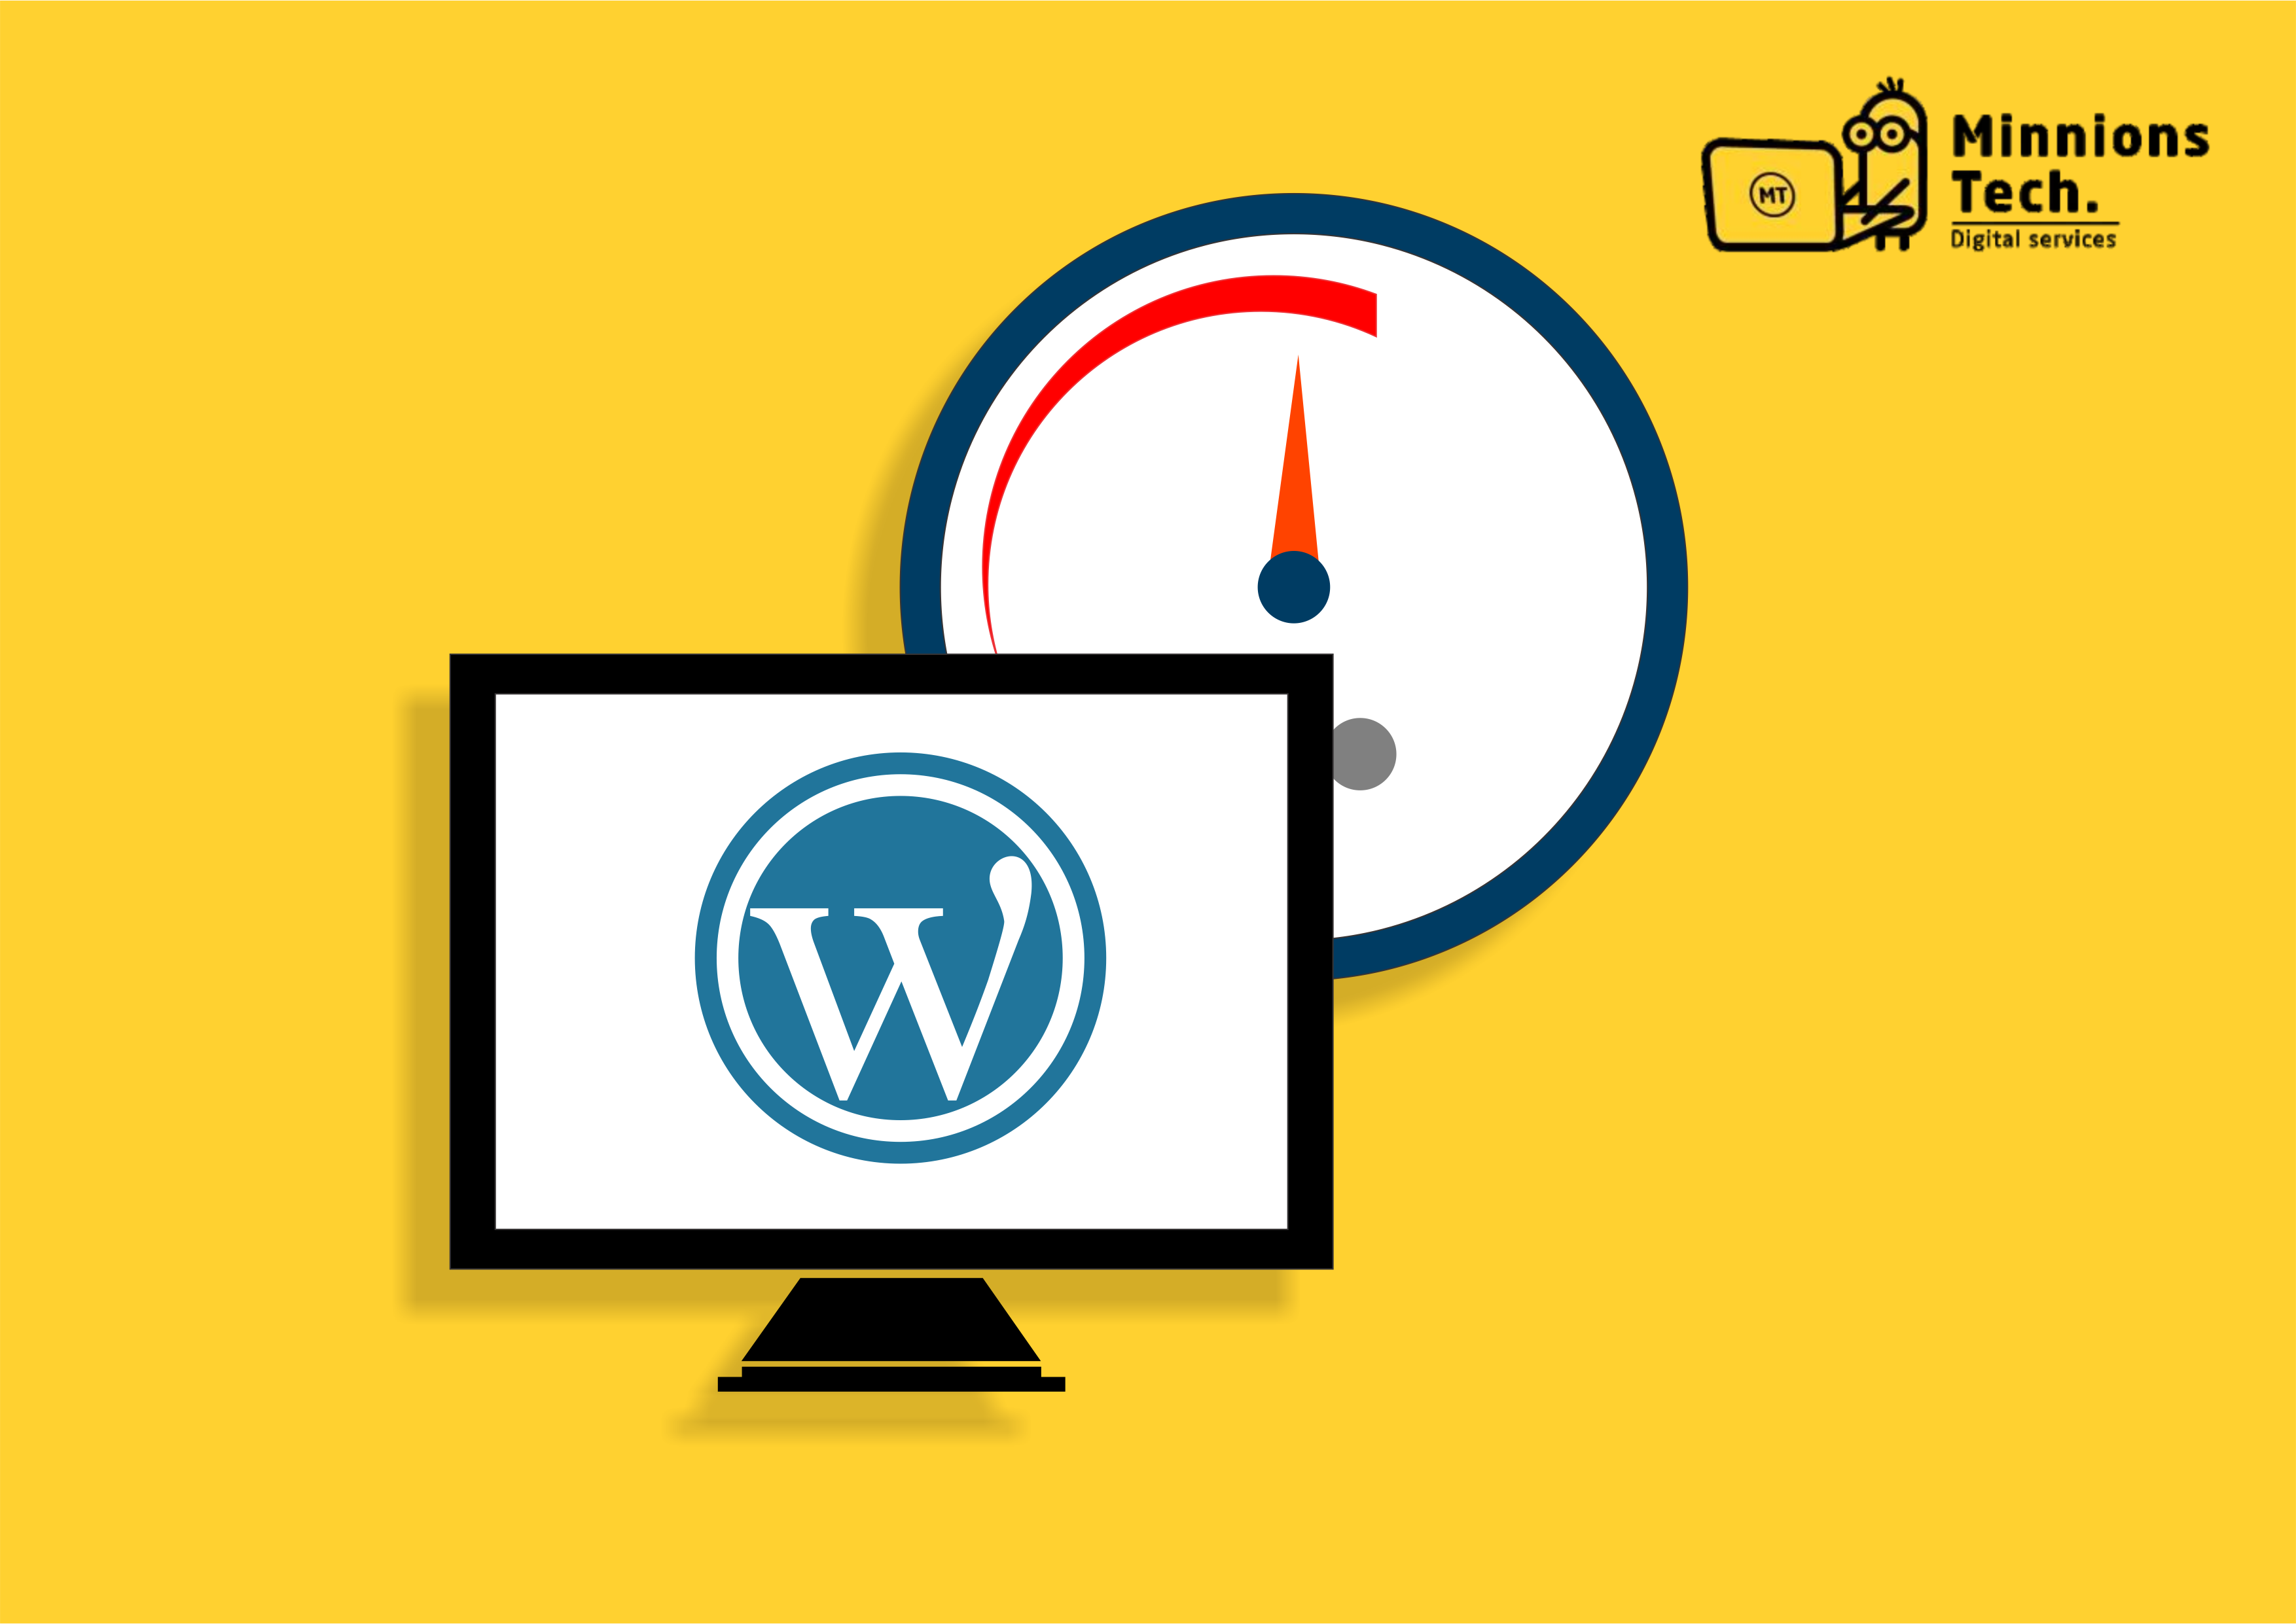 How to Speed Up WordPress Site in 5 Minutes.